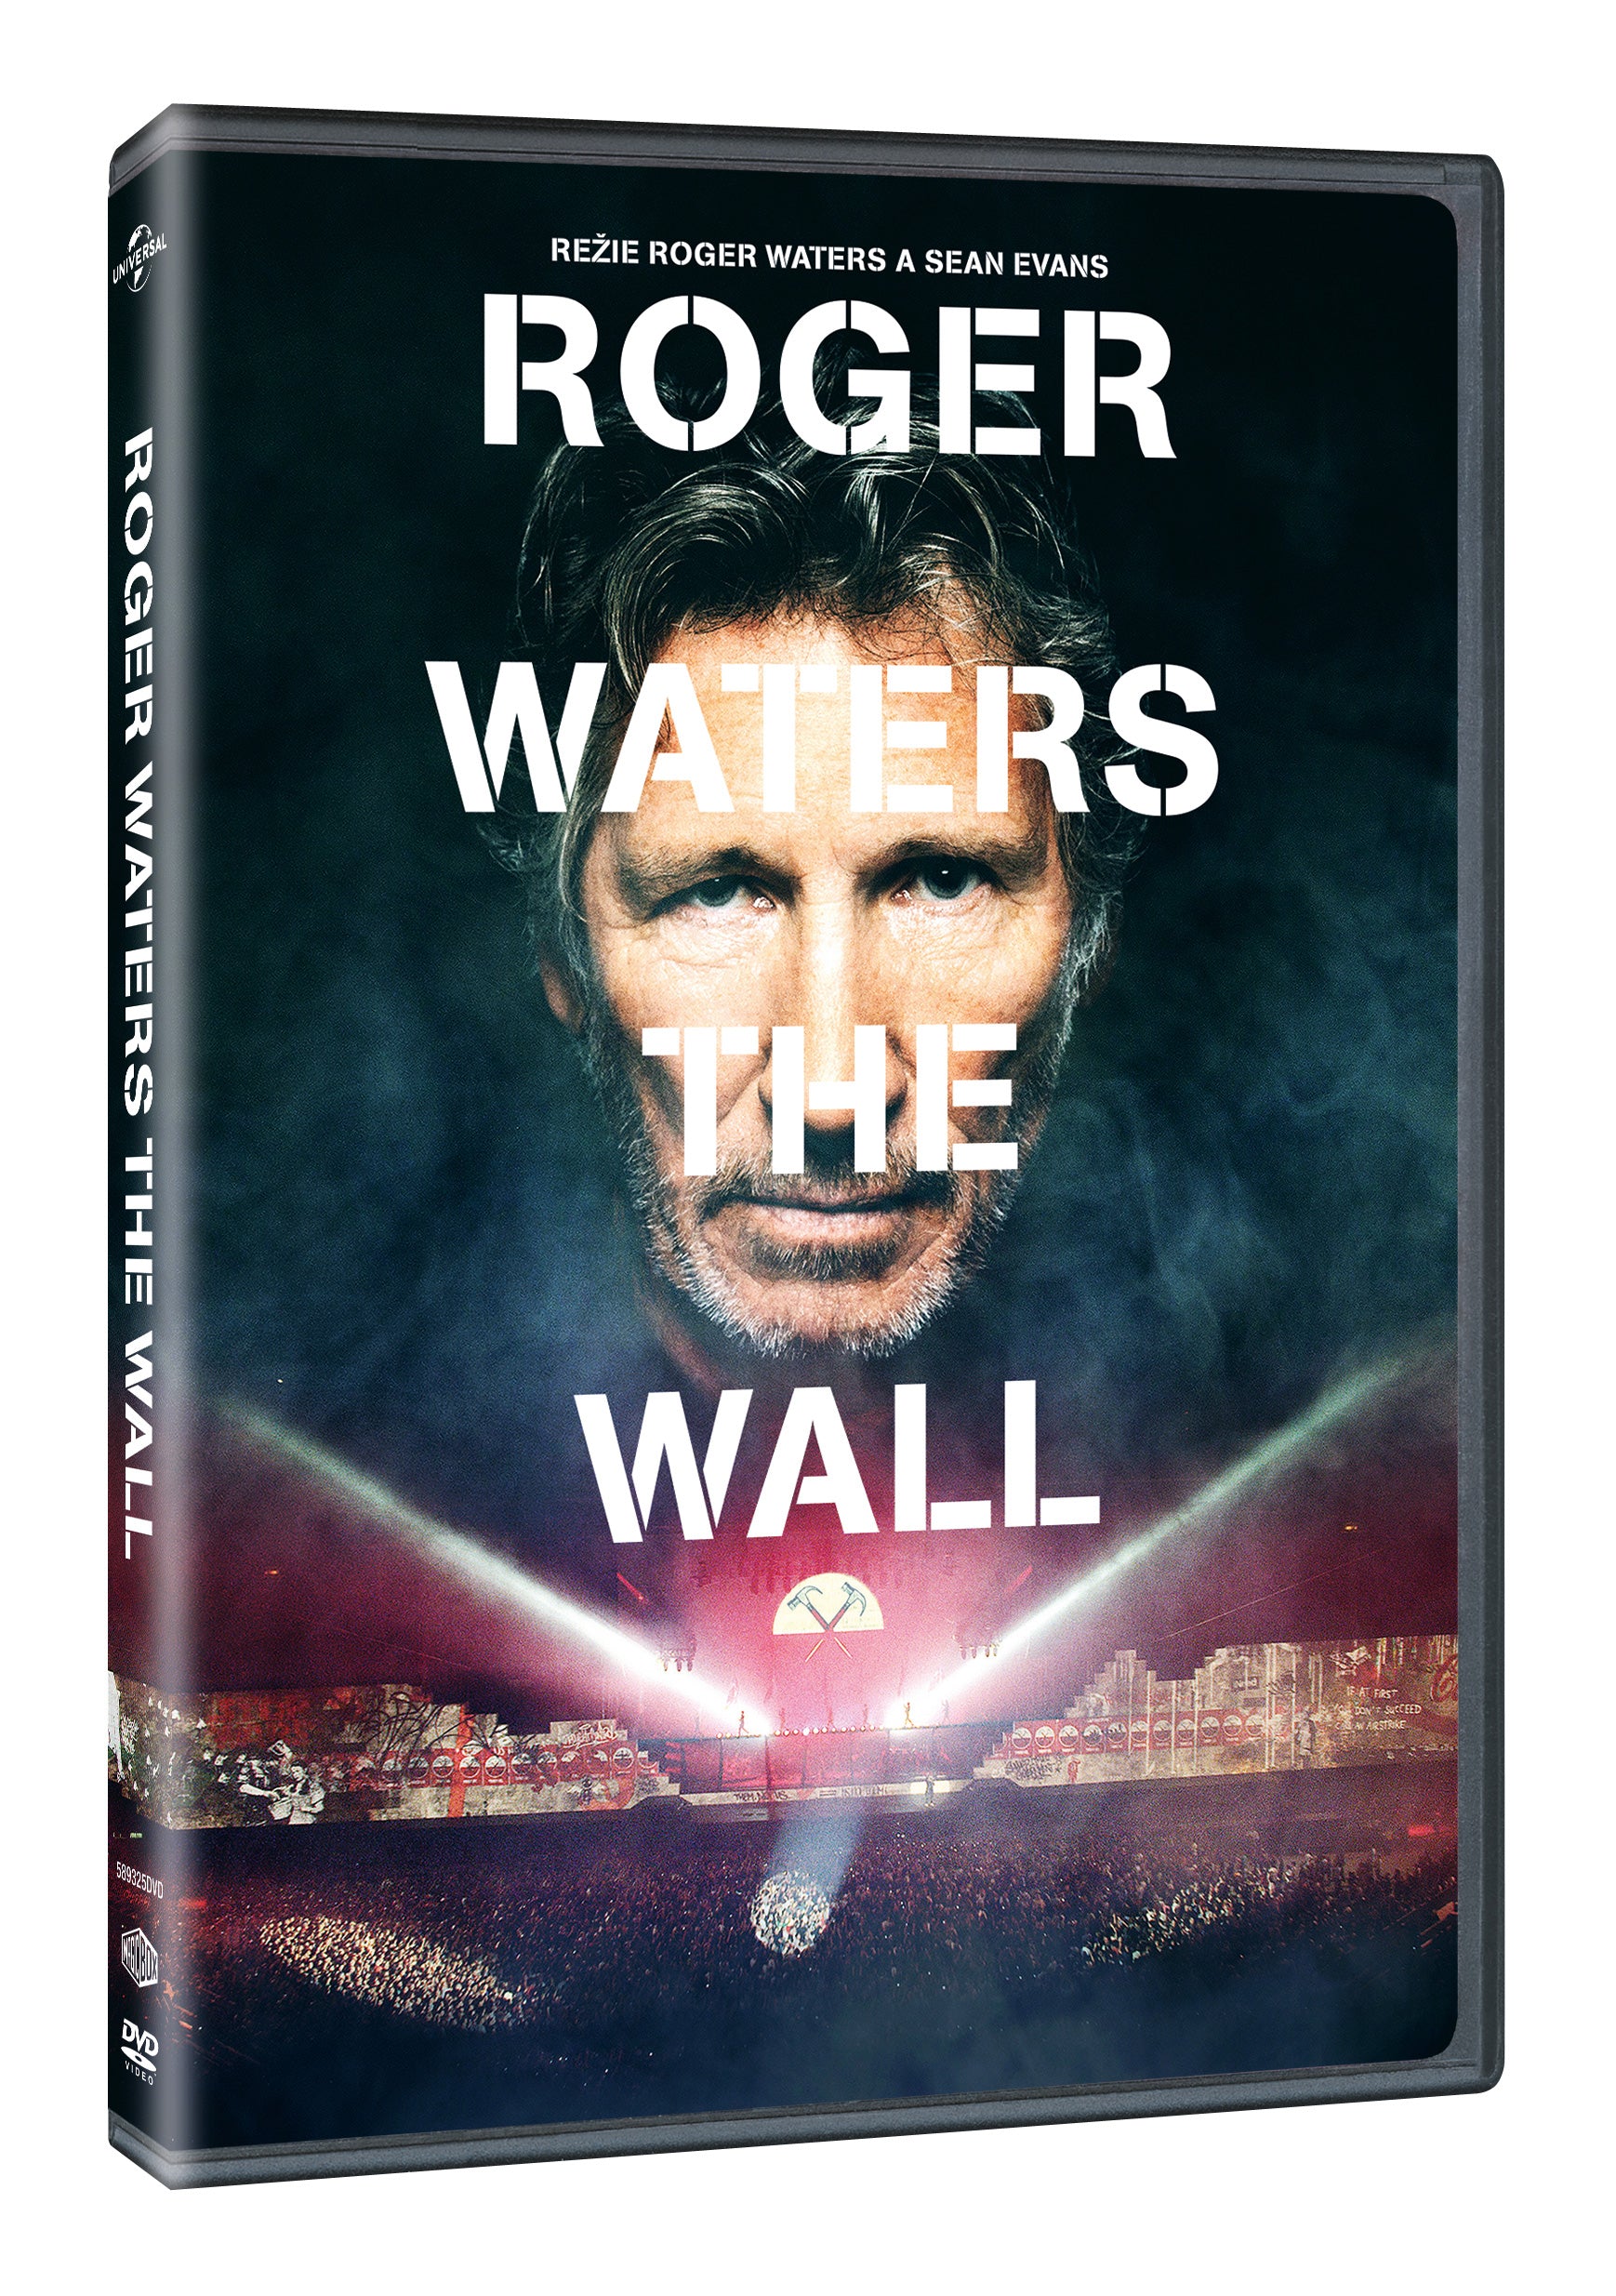 Roger Waters: The Wall DVD / Roger Waters The Wall